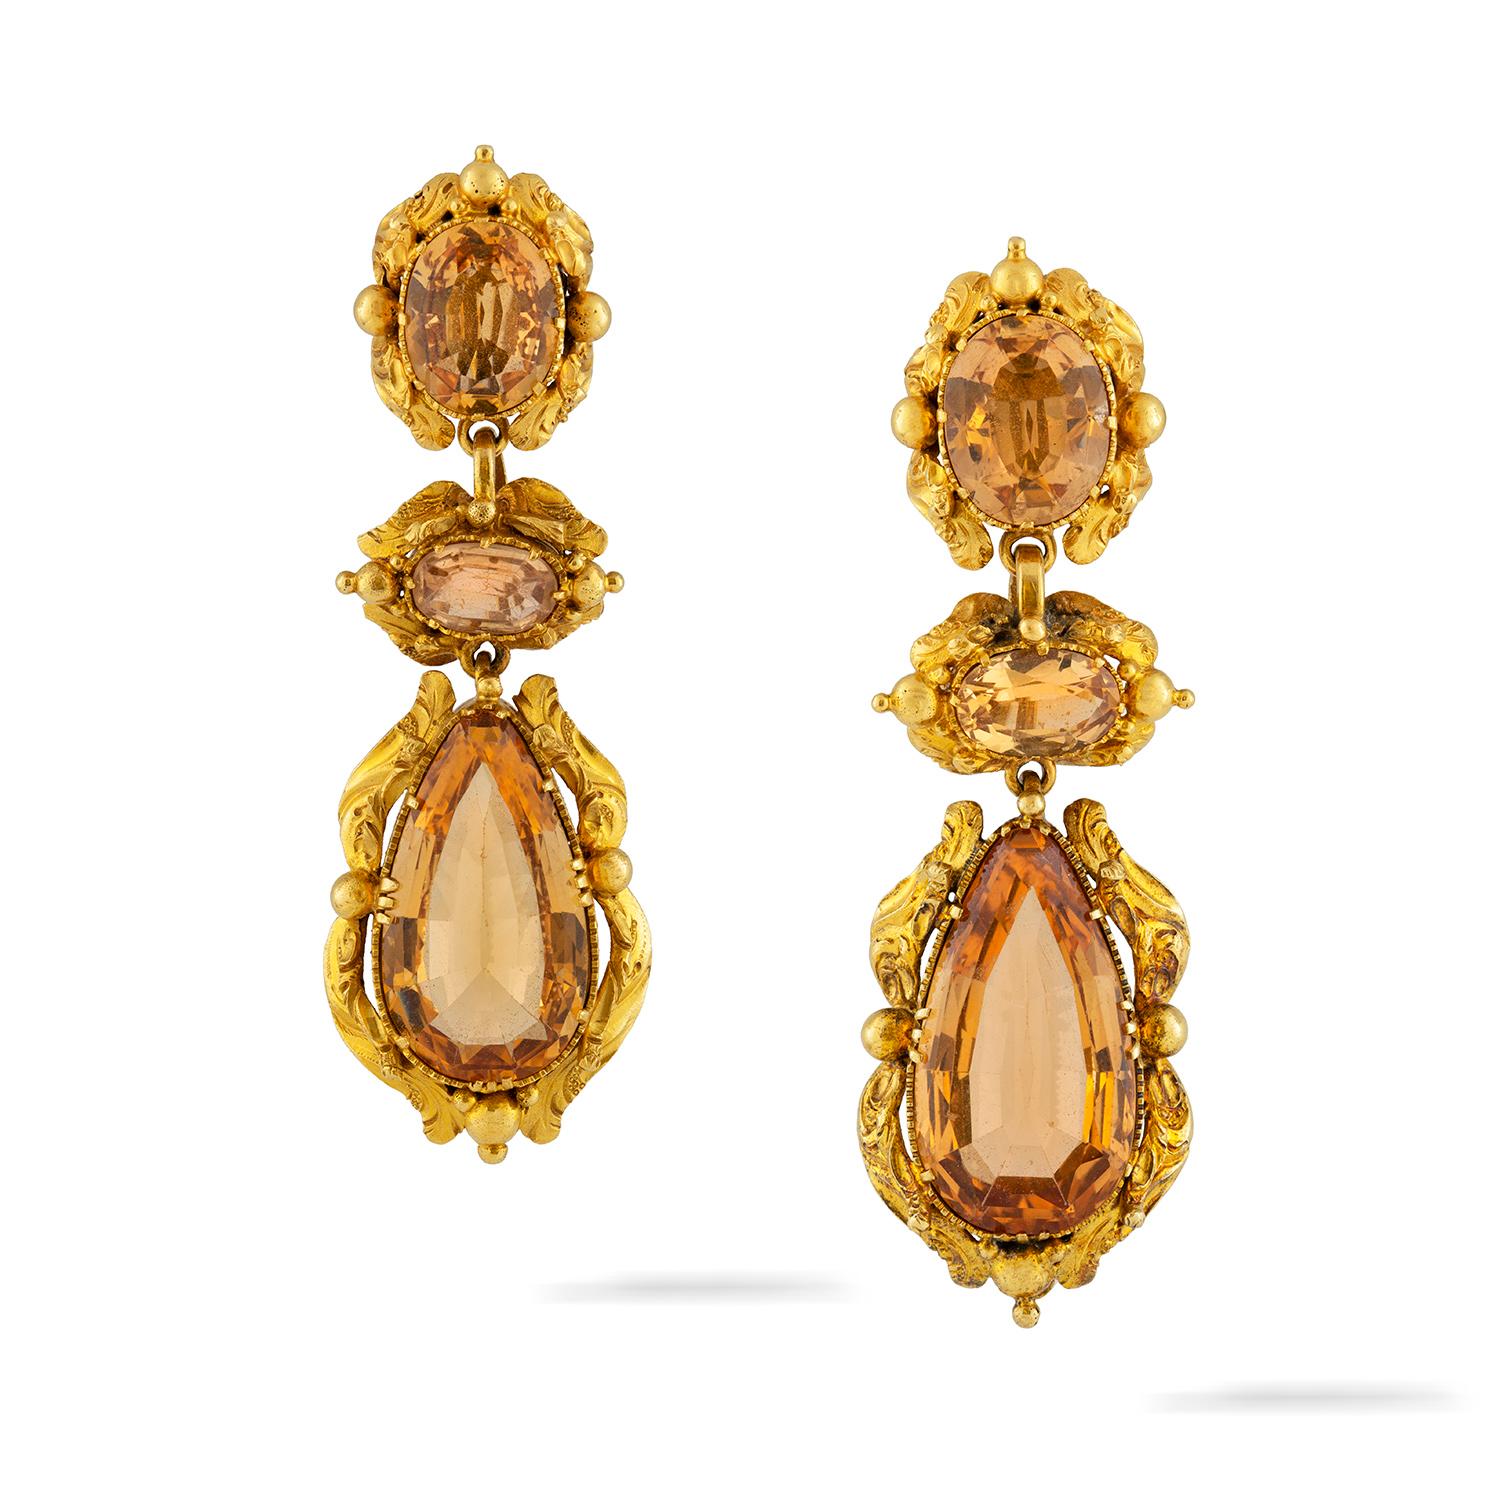 An early Victorian topaz and gold repousse suite, the necklace consisting of nine graduating from the centre oval faceted topazes, set on gold collets with repousse-work decorations, suspended by seven rows of gold trace chain, to a topaz-set clasp,